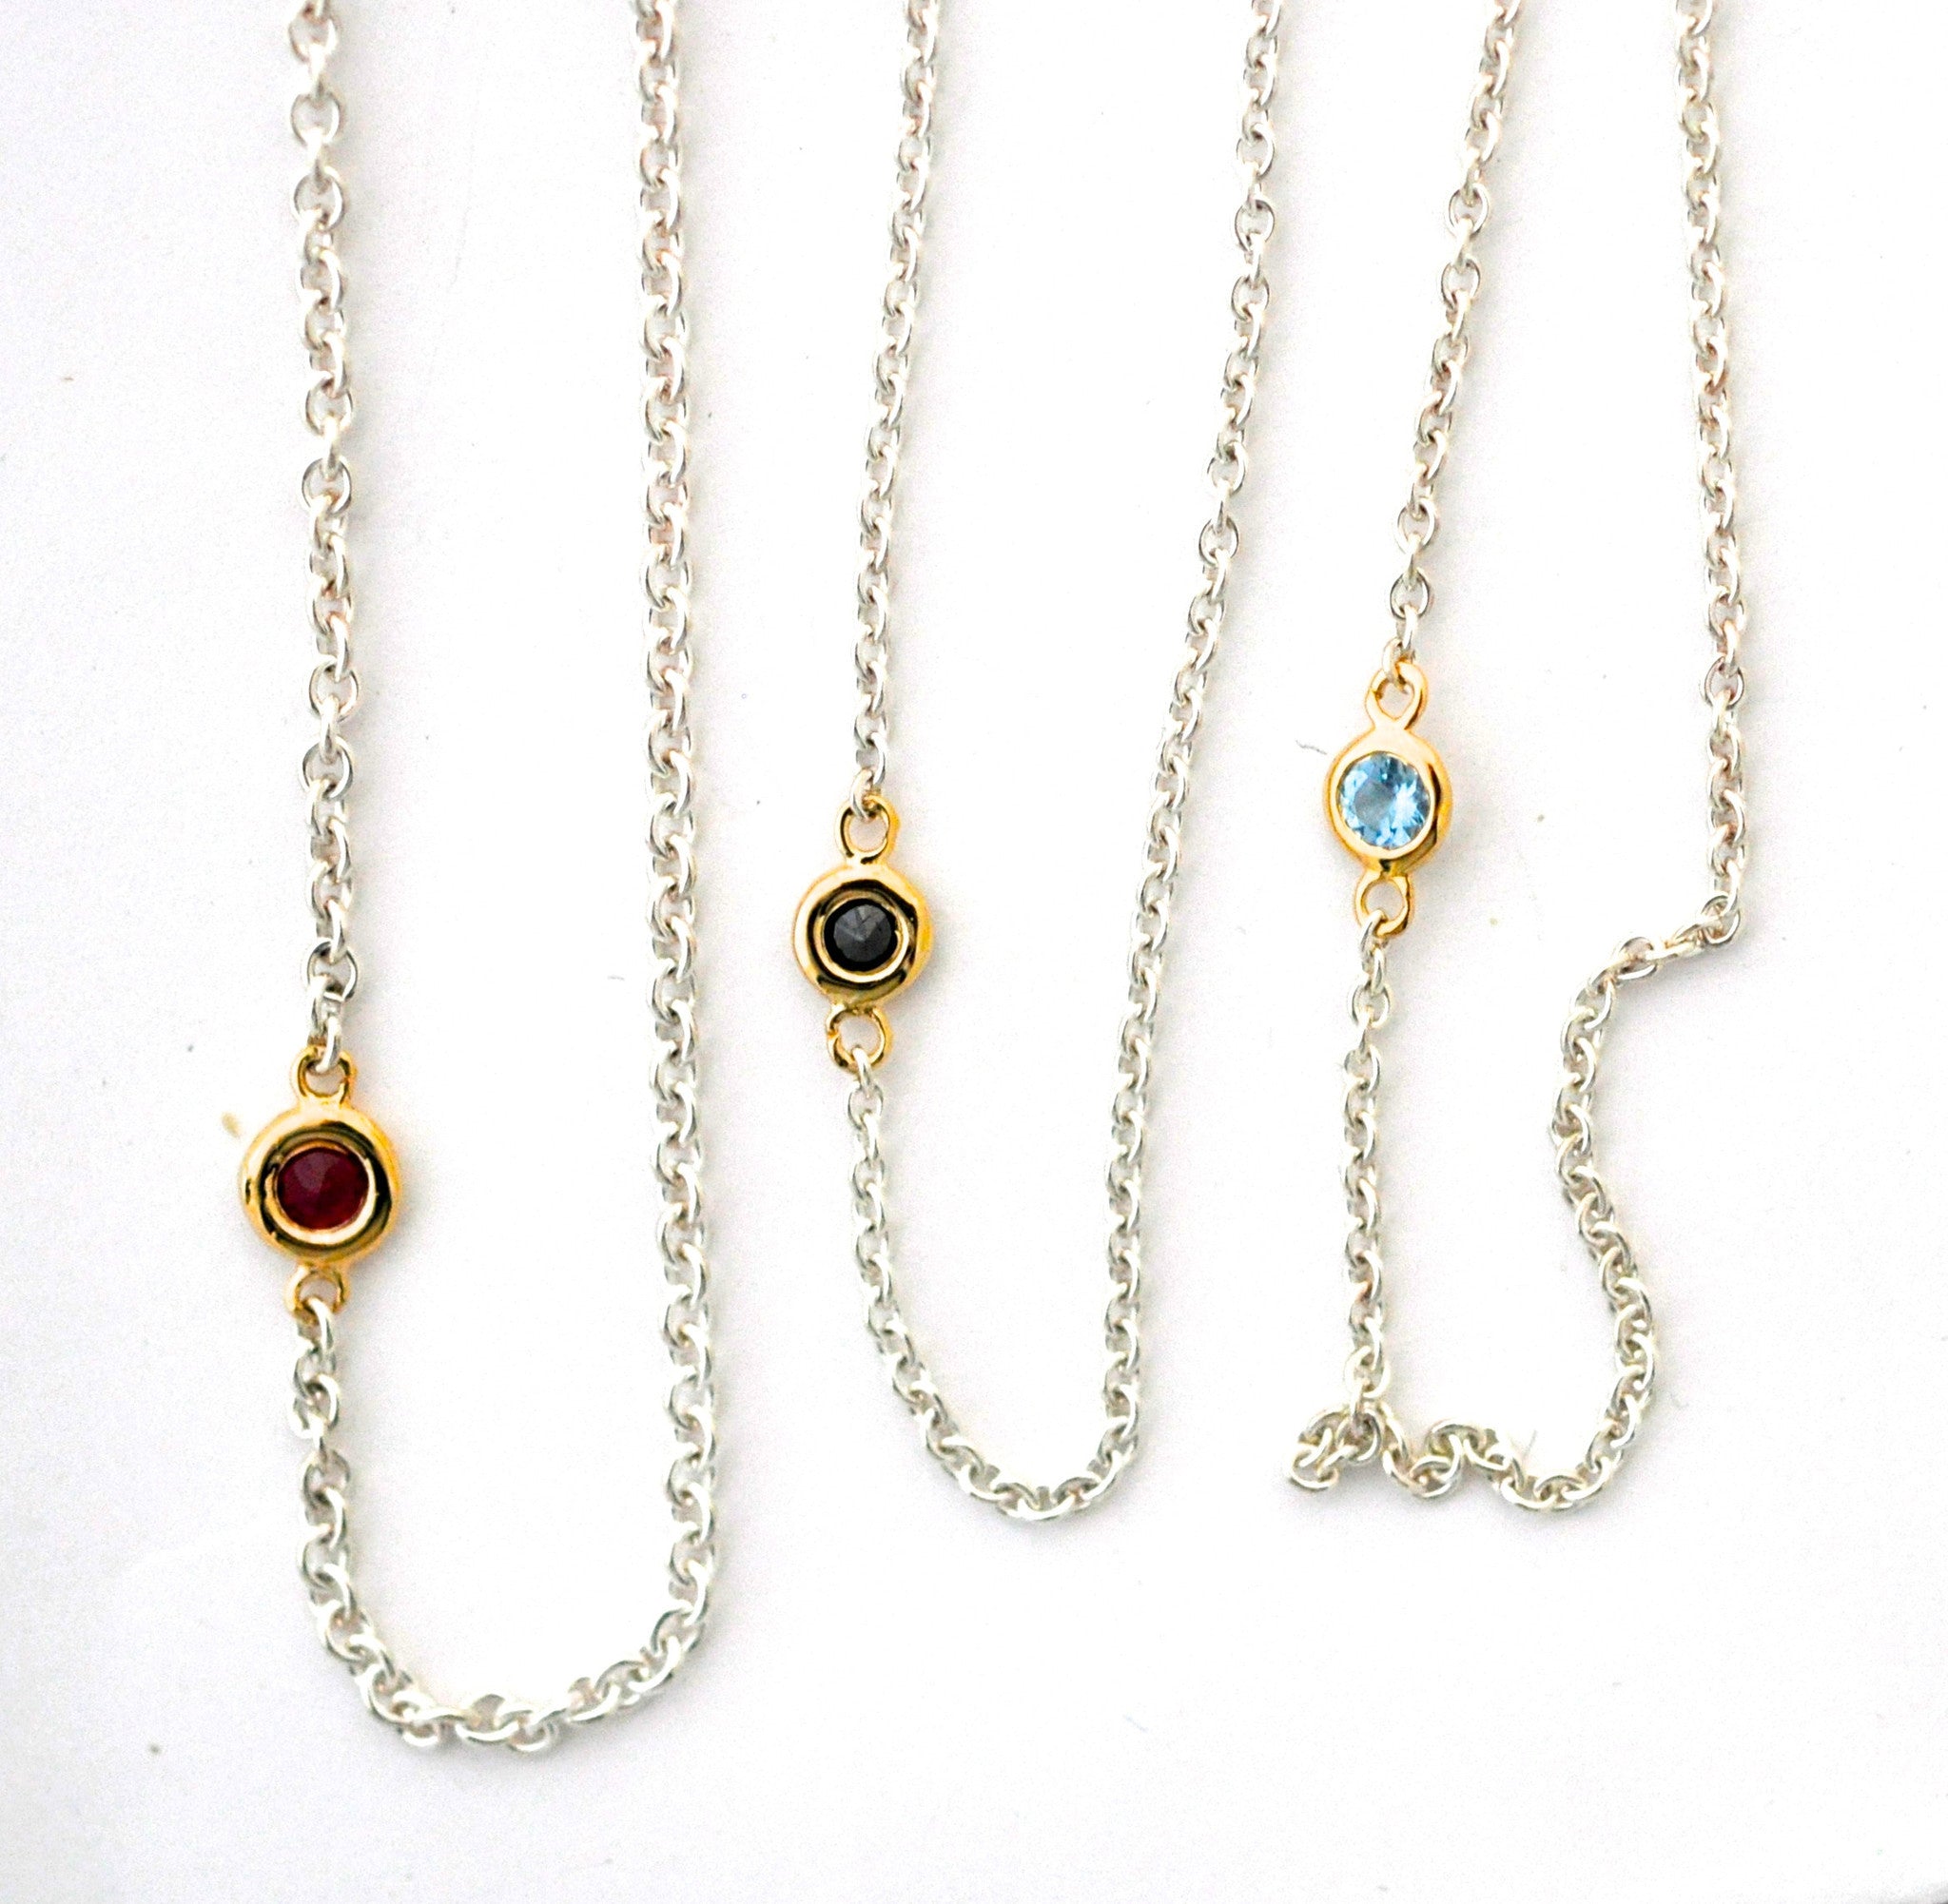 necklace / silver + small gemstone in gold bezel